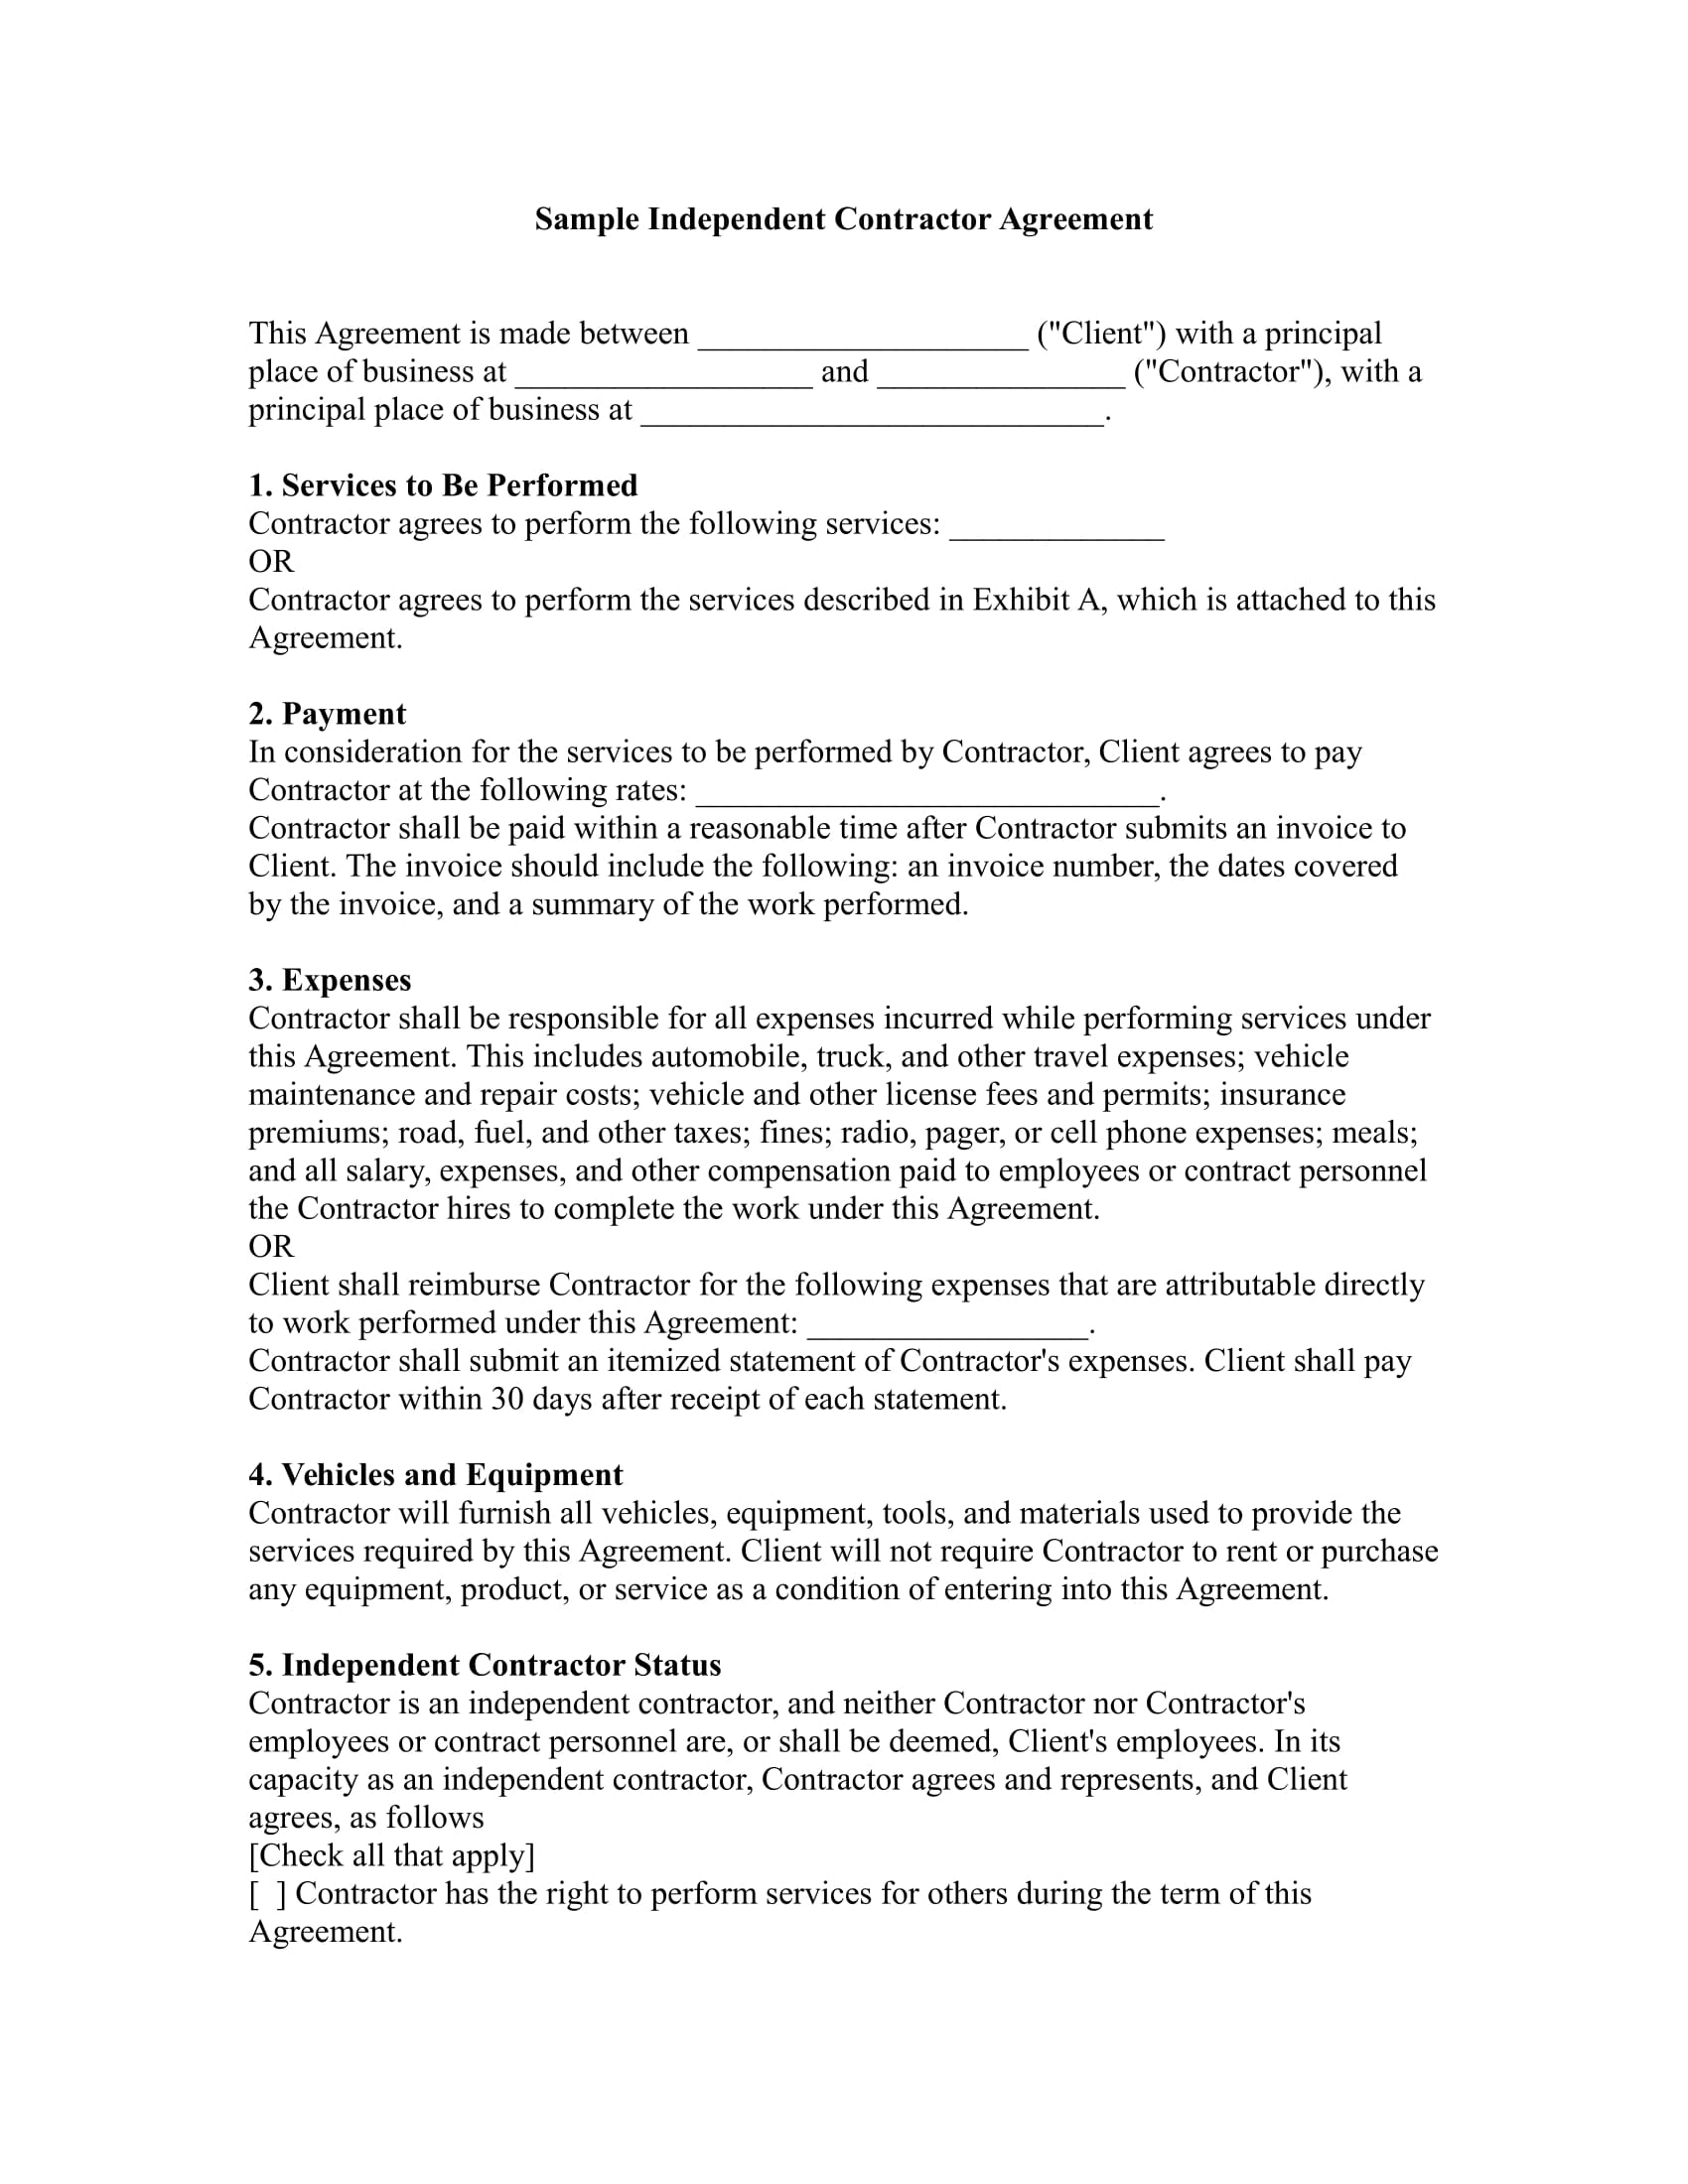 sample independent contractor agreement